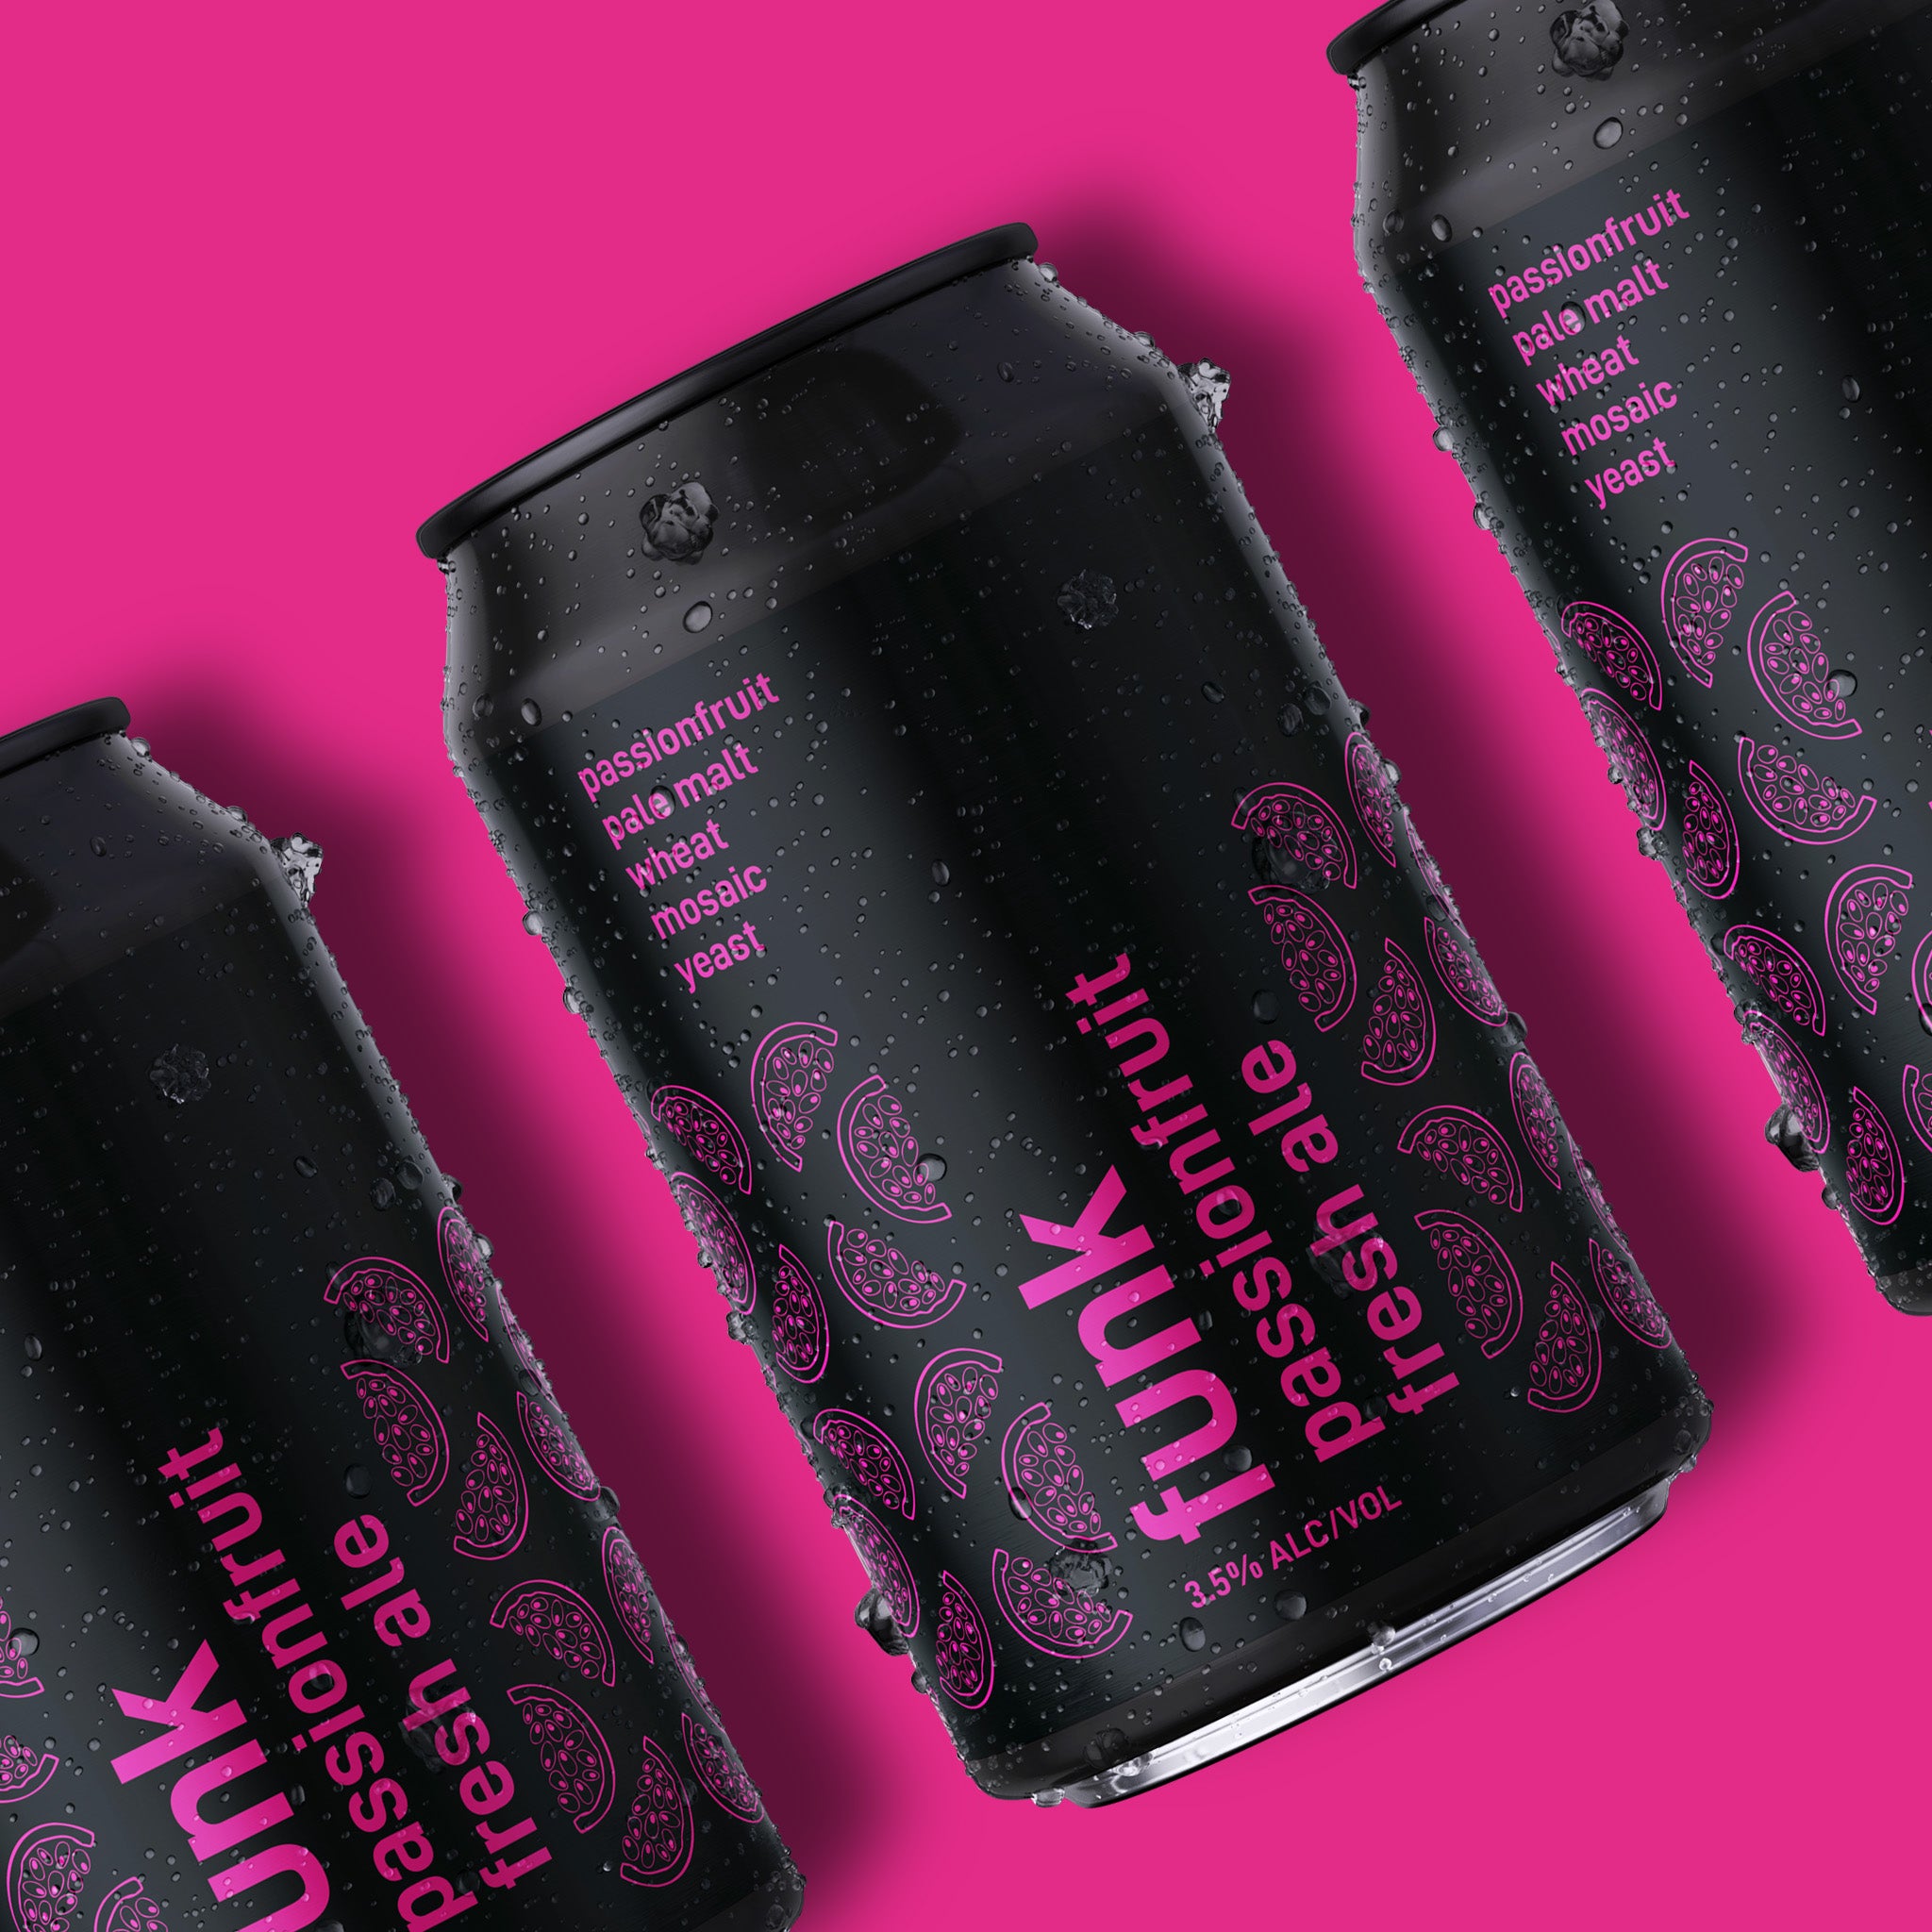 Funk Passionfruit Fresh ale in cans